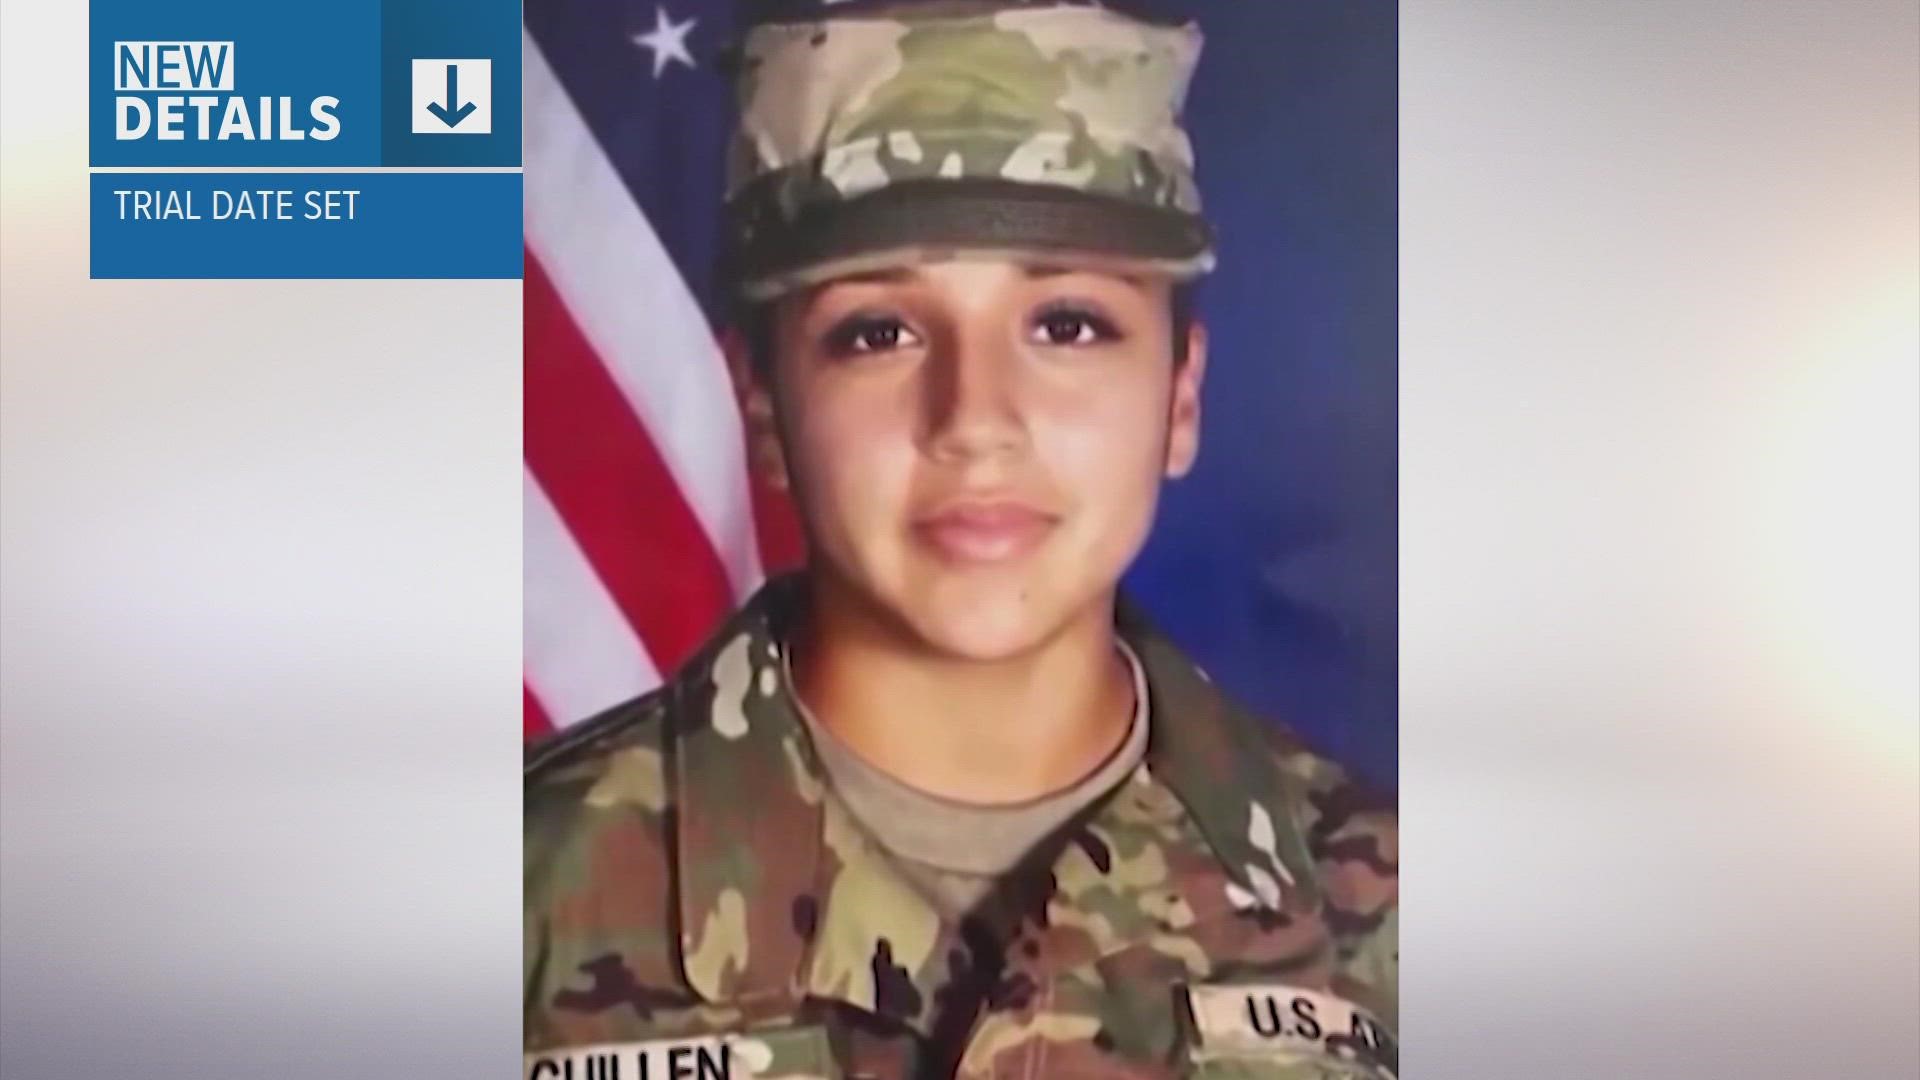 A trial date has been set for the woman accused of helping dismember and bury Fort Hood SPC Vanessa Guillen's body in 2020.